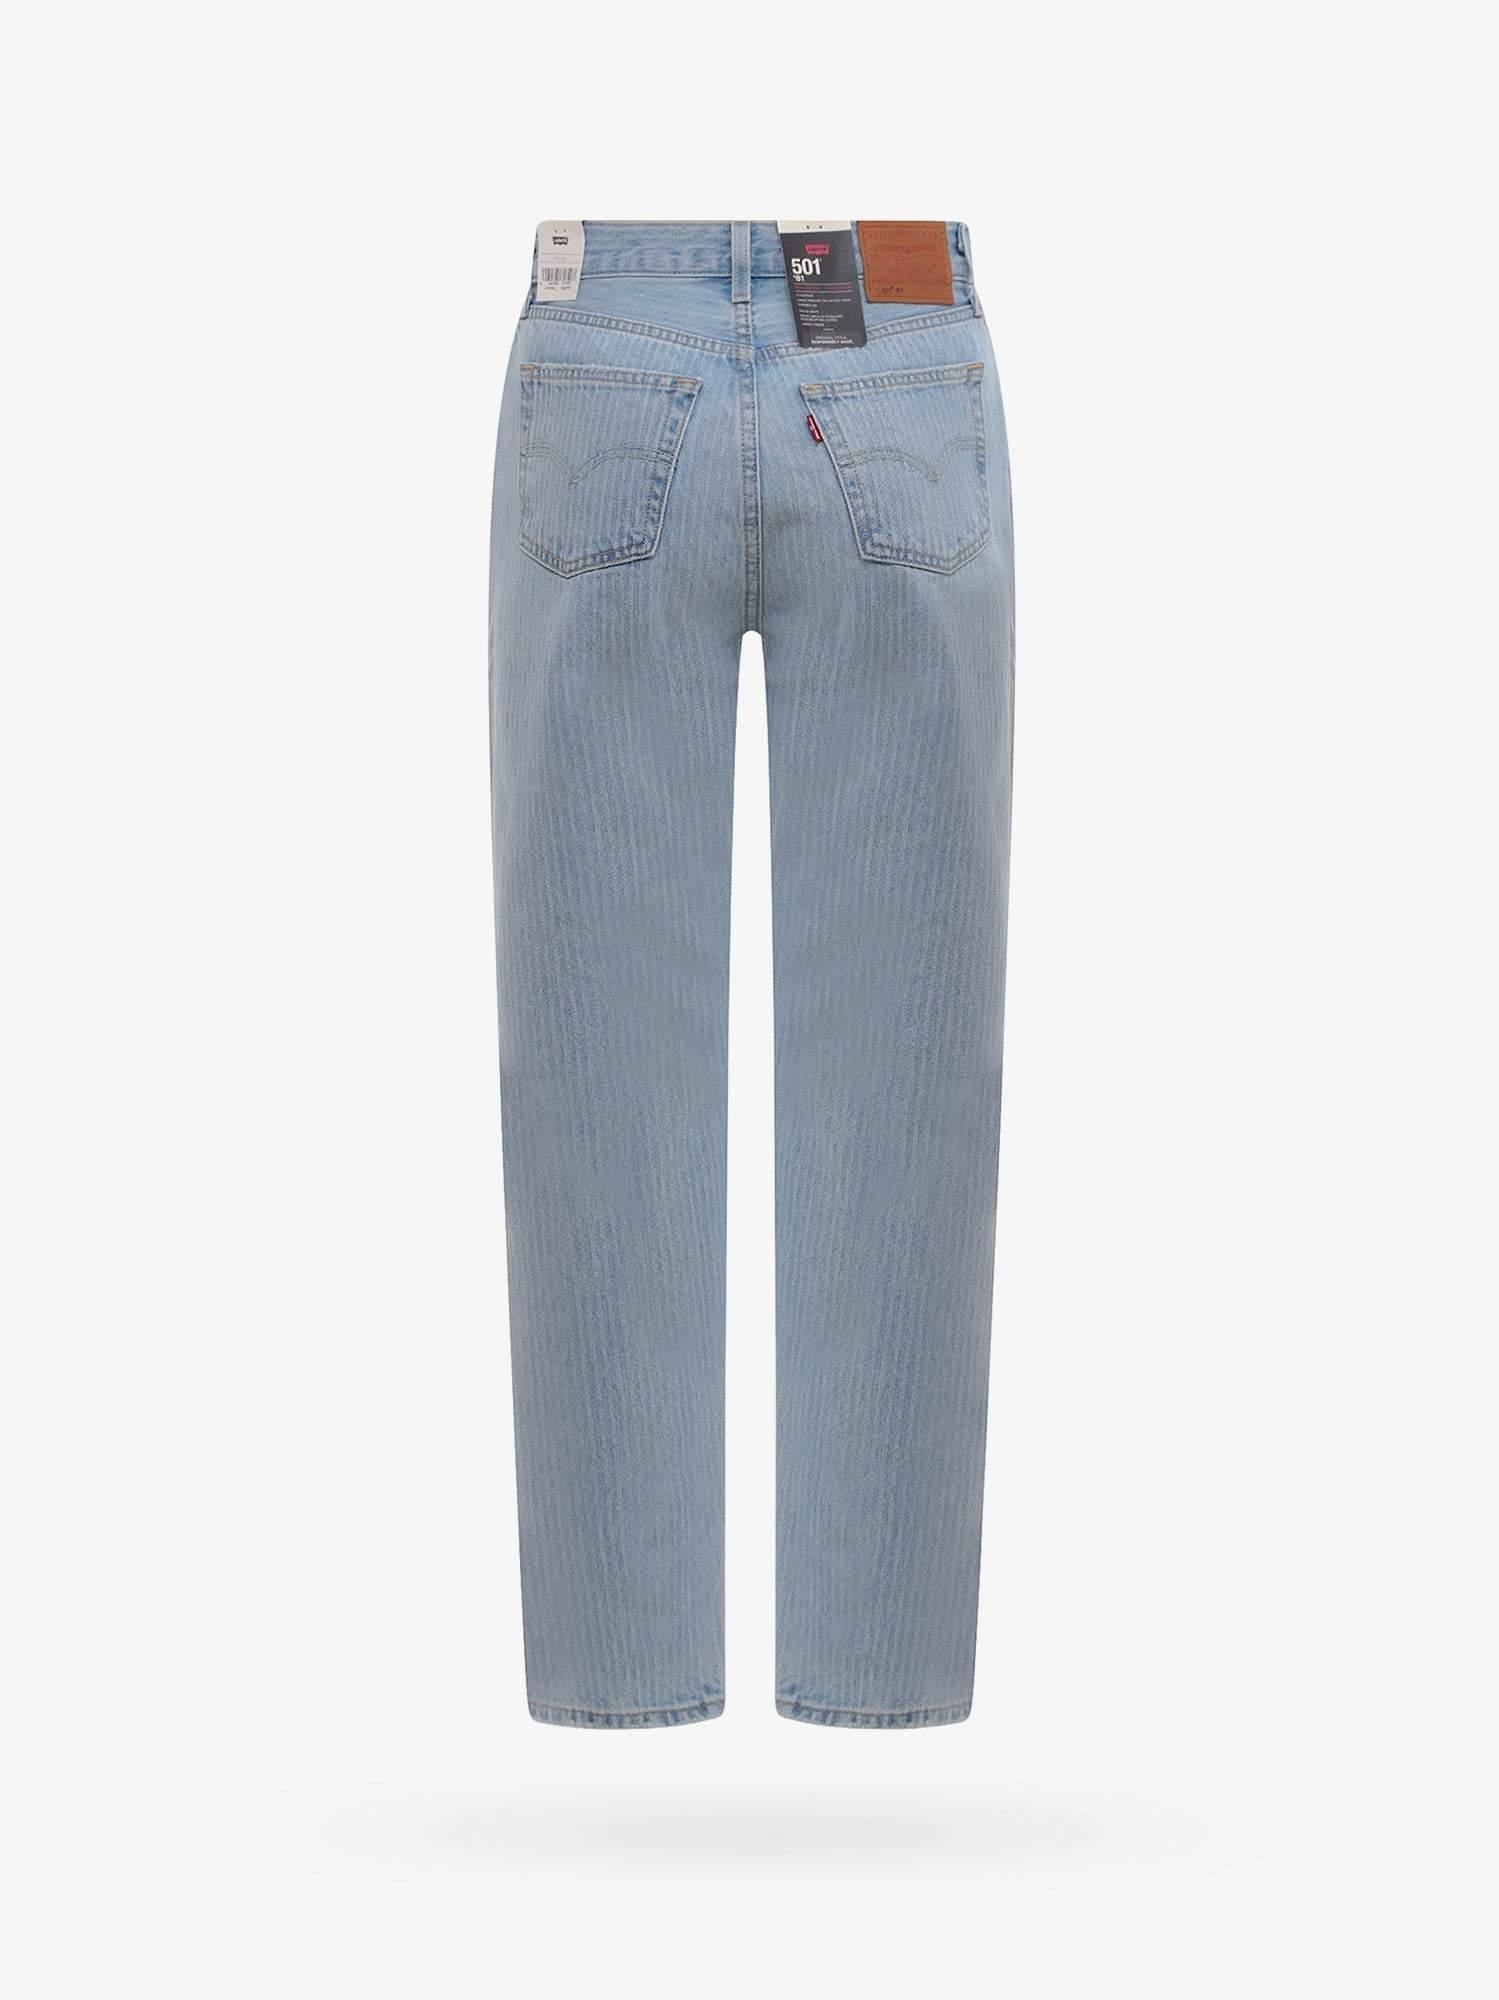 Levi's Straight Leg Cotton Closure With Metal Buttons Jeans in Blue | Lyst